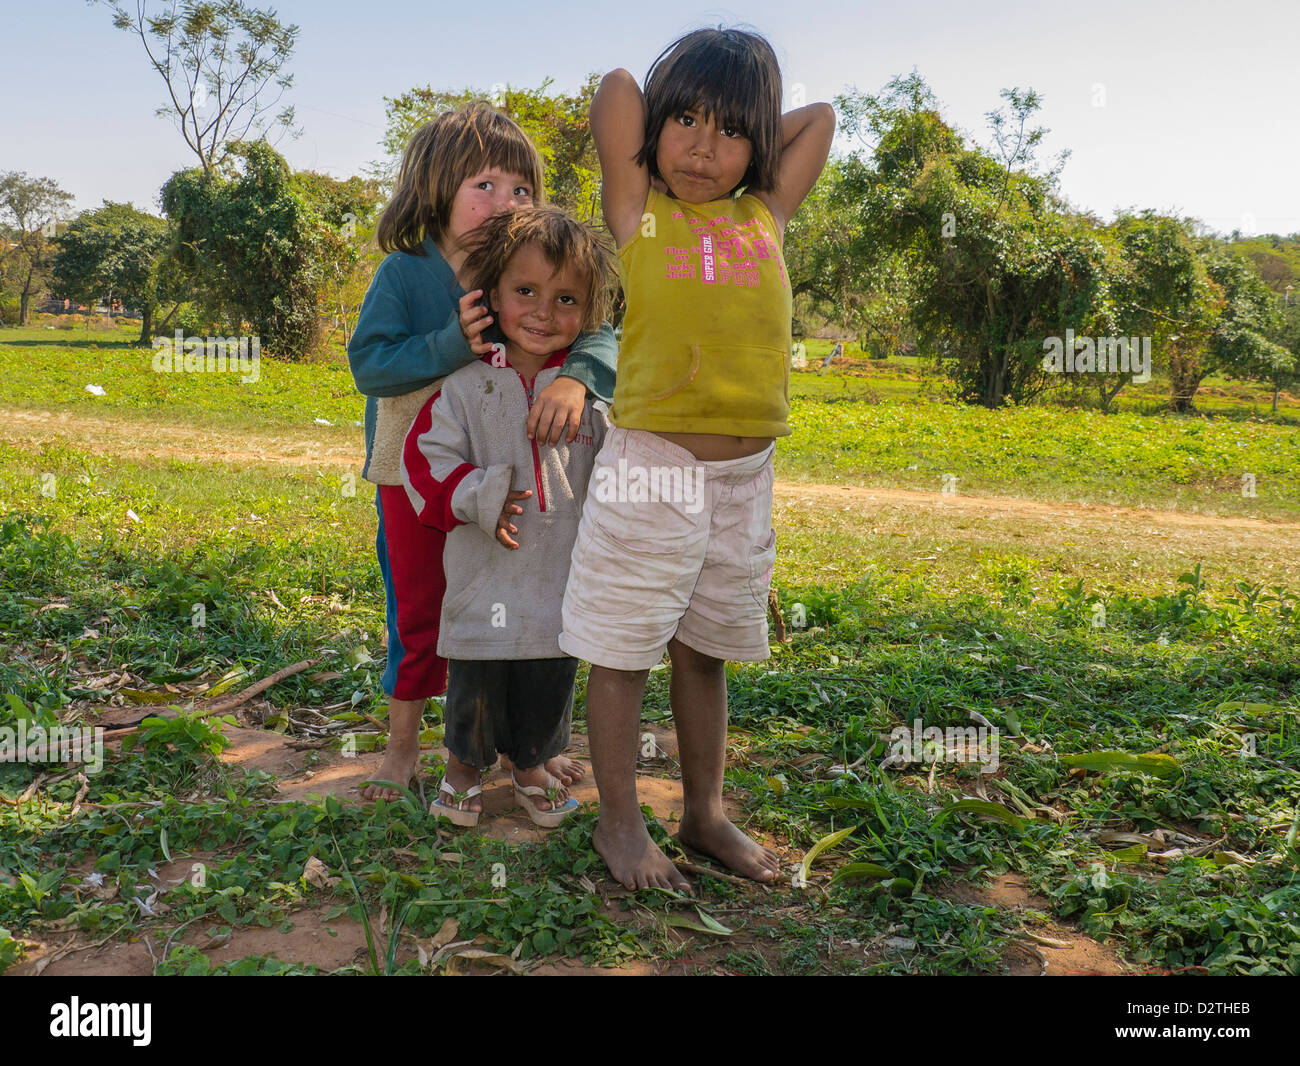 Young Paraguayan Hispanic girls who are hanging out by a Habitat for Humanity home building project/ Stock Photo